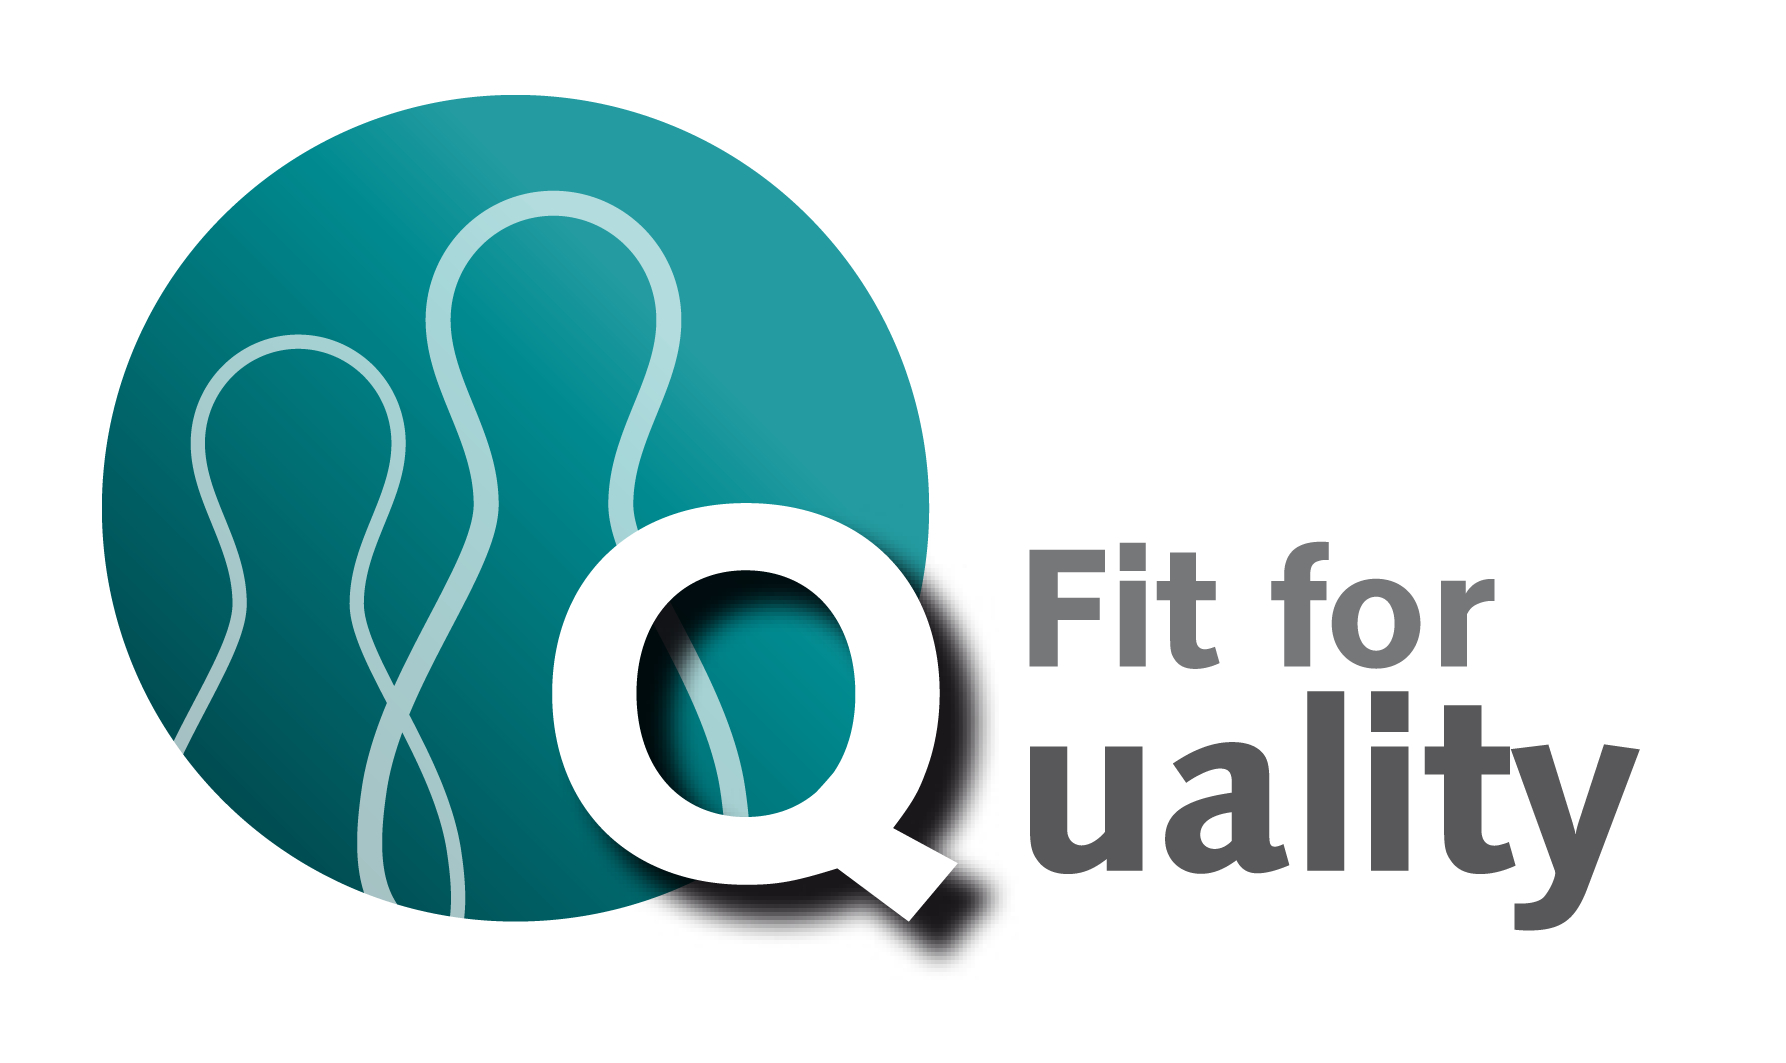 Fit For Quality logo